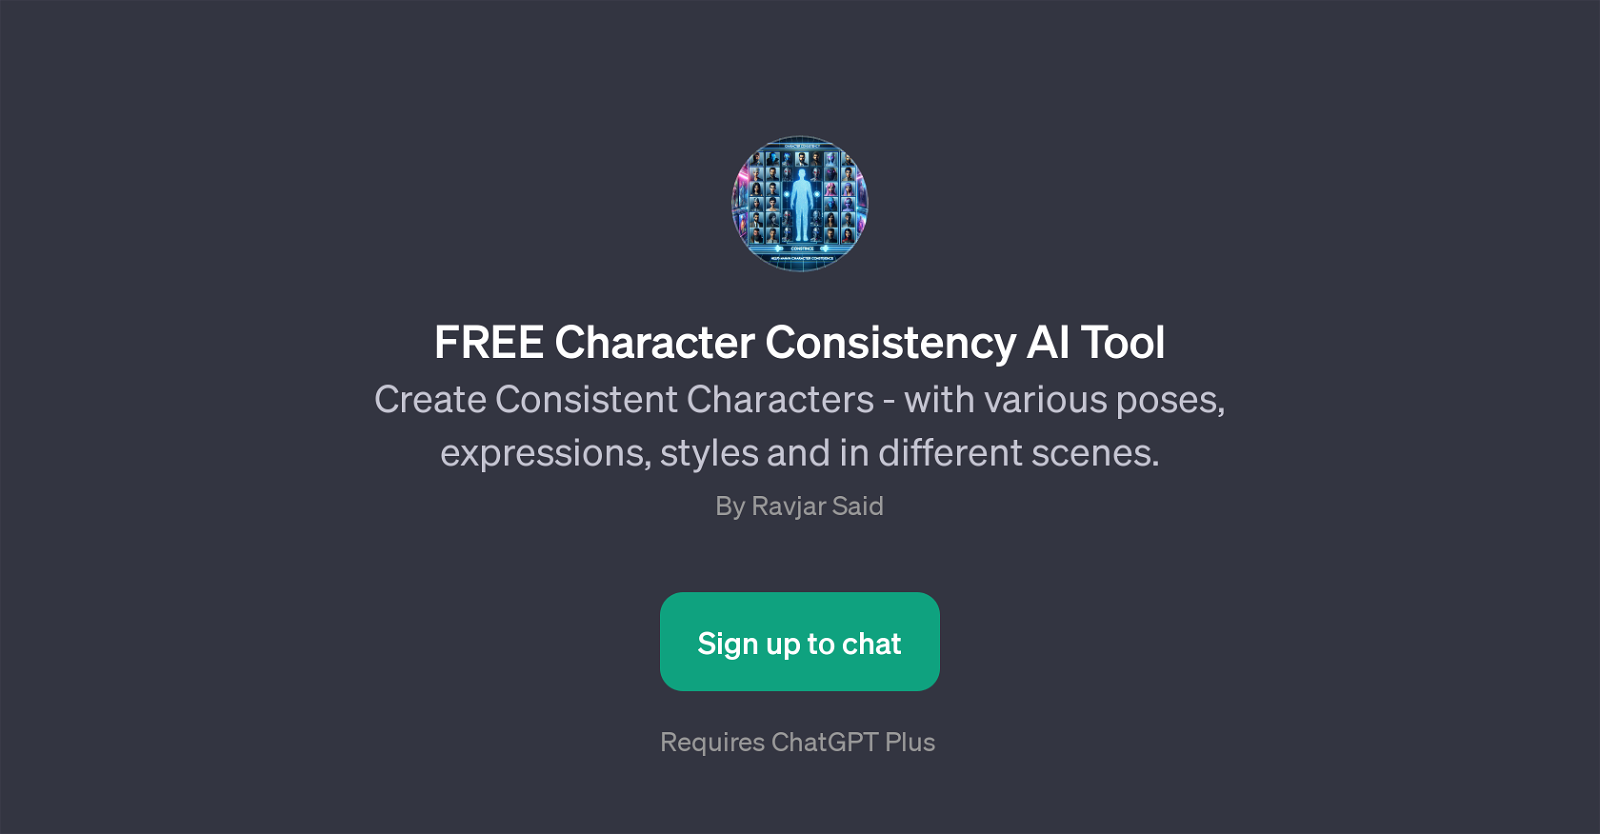 FREE Character Consistency AI Tool website